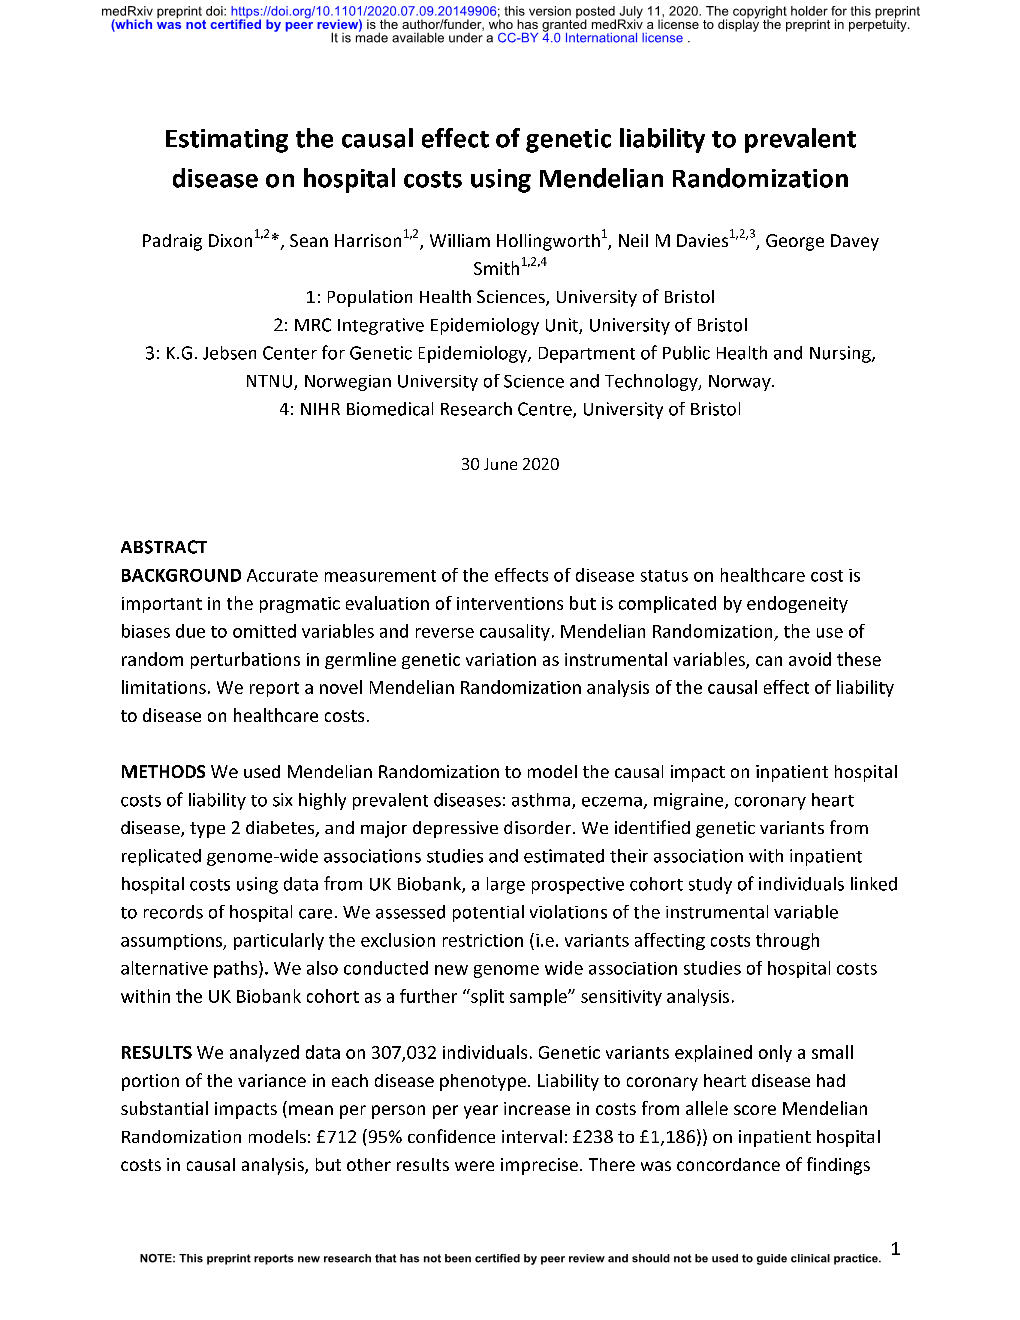 Estimating the Causal Effect of Genetic Liability to Prevalent Disease on Hospital Costs Using Mendelian Randomization